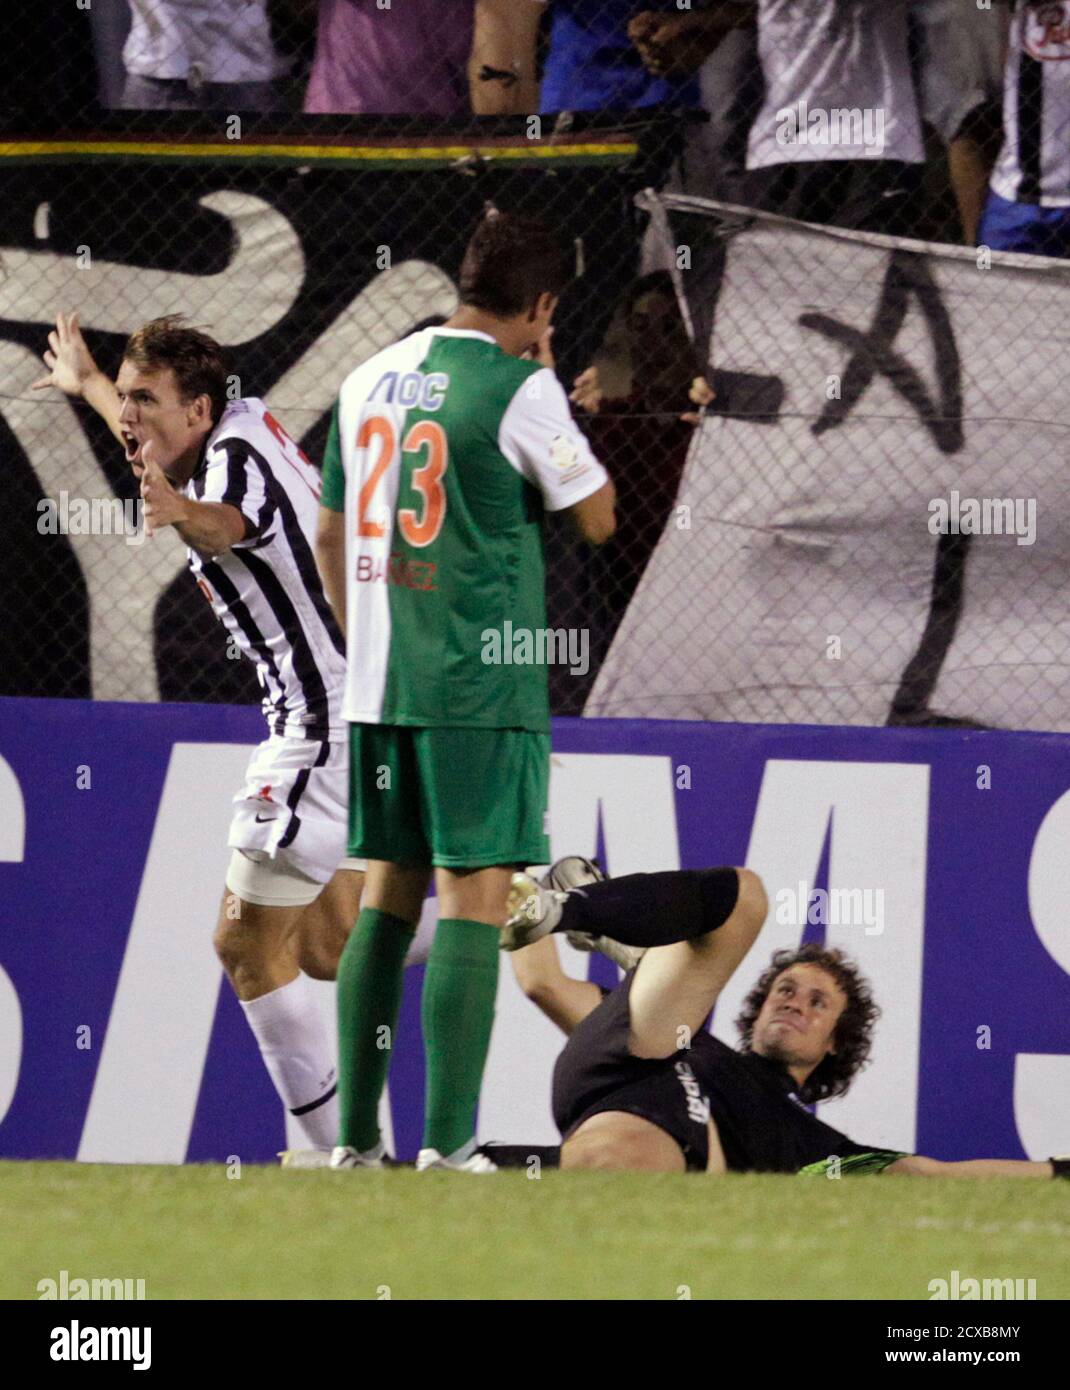 Luciano Civelli (L) of Paraguay's Libertad celebrates his goal against  Peru's Alianza de Lima Walter Ibanez (23) and goalkeeper Salomon Libman  during their Copa Libertadores soccer match in Asuncion, February 9, 2012.